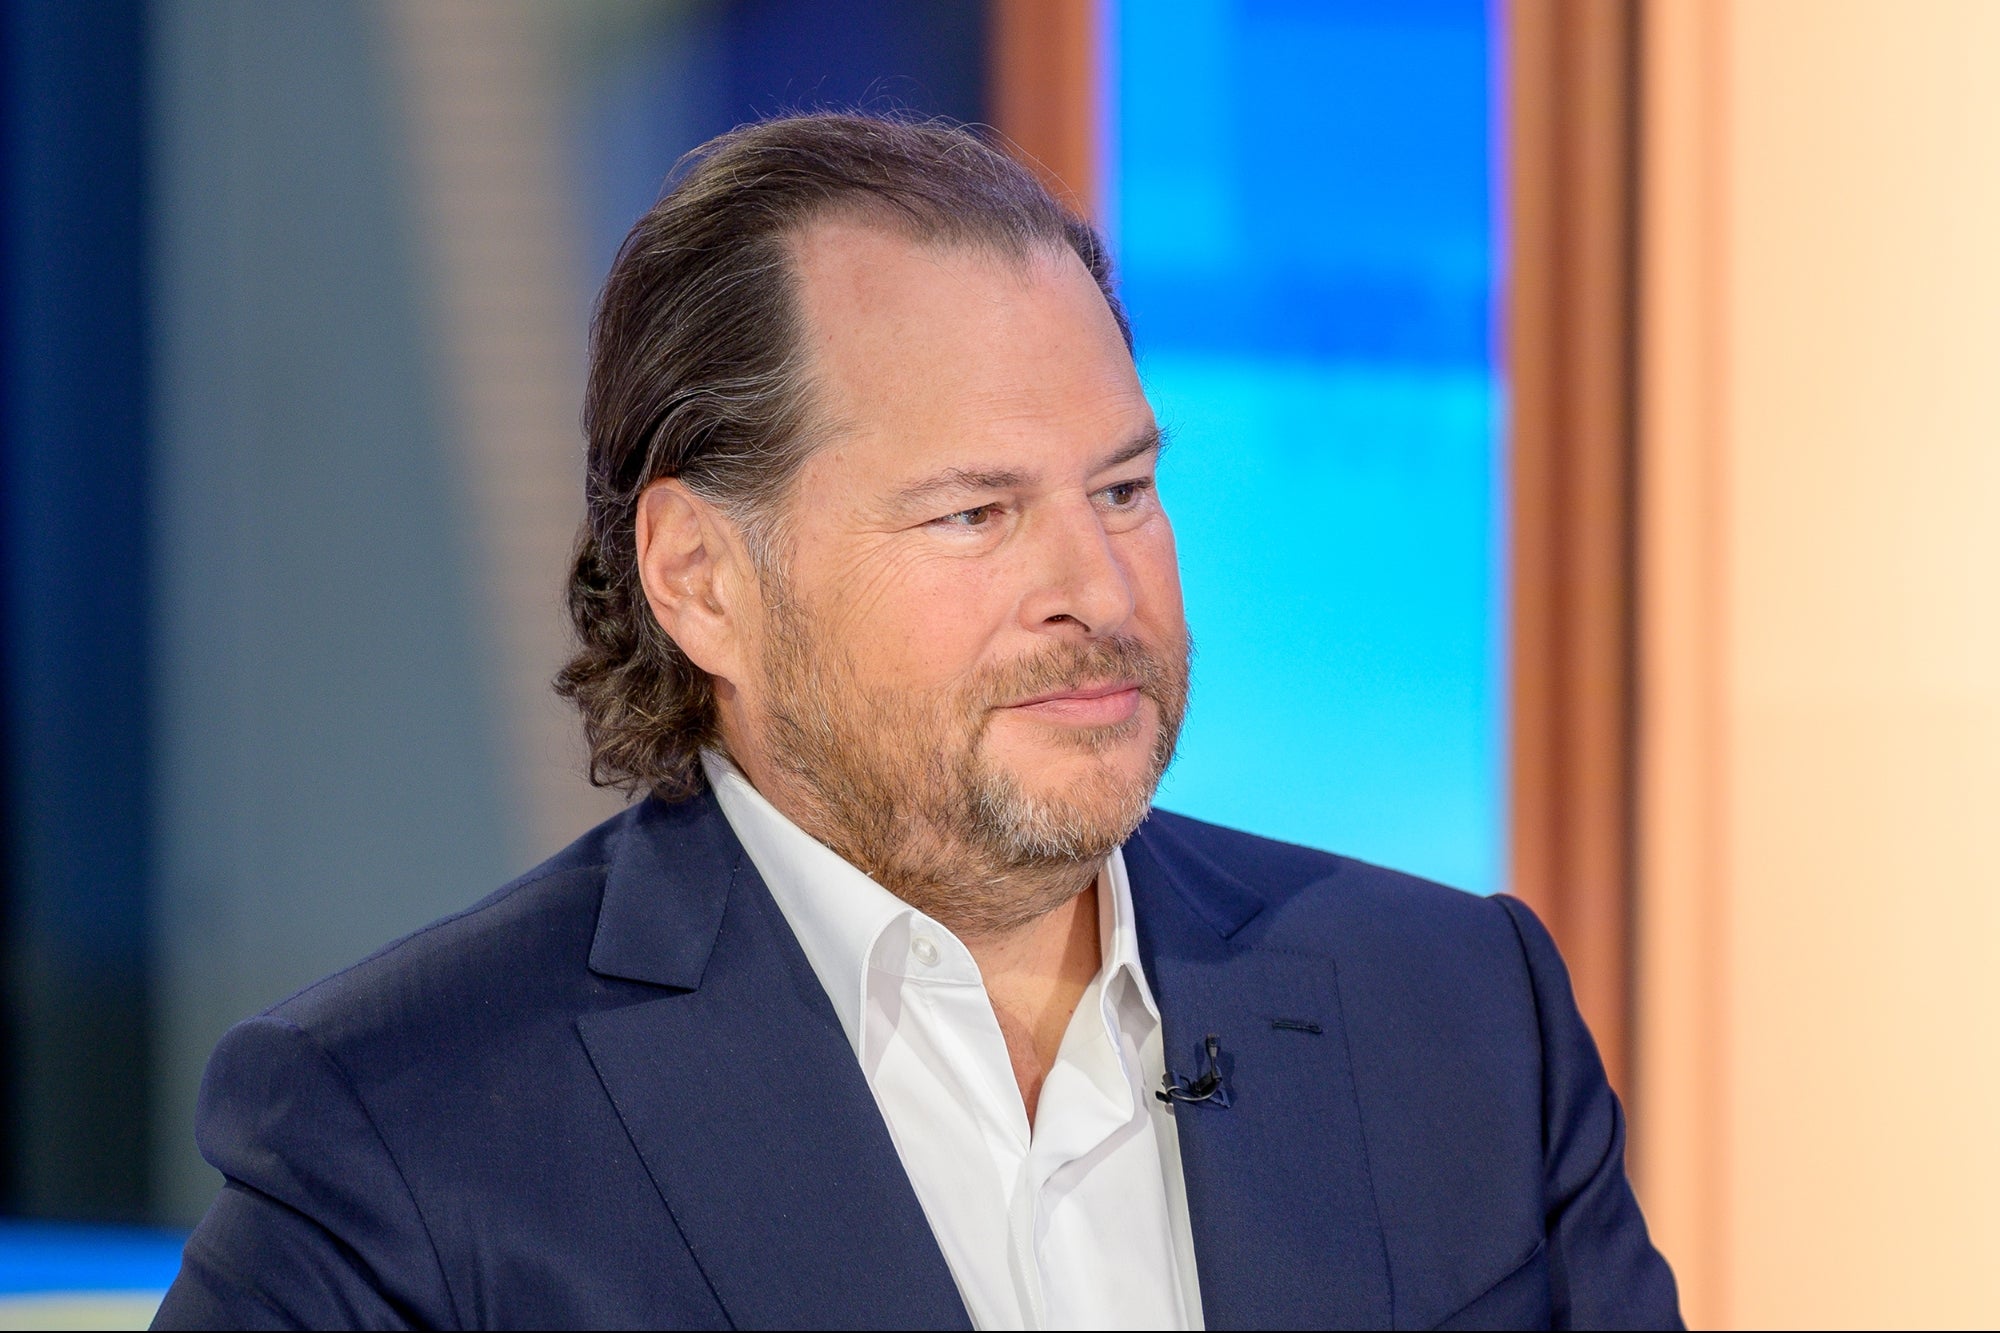 What I Learned From Pitching Marc Benioff My Startup at Dreamforce